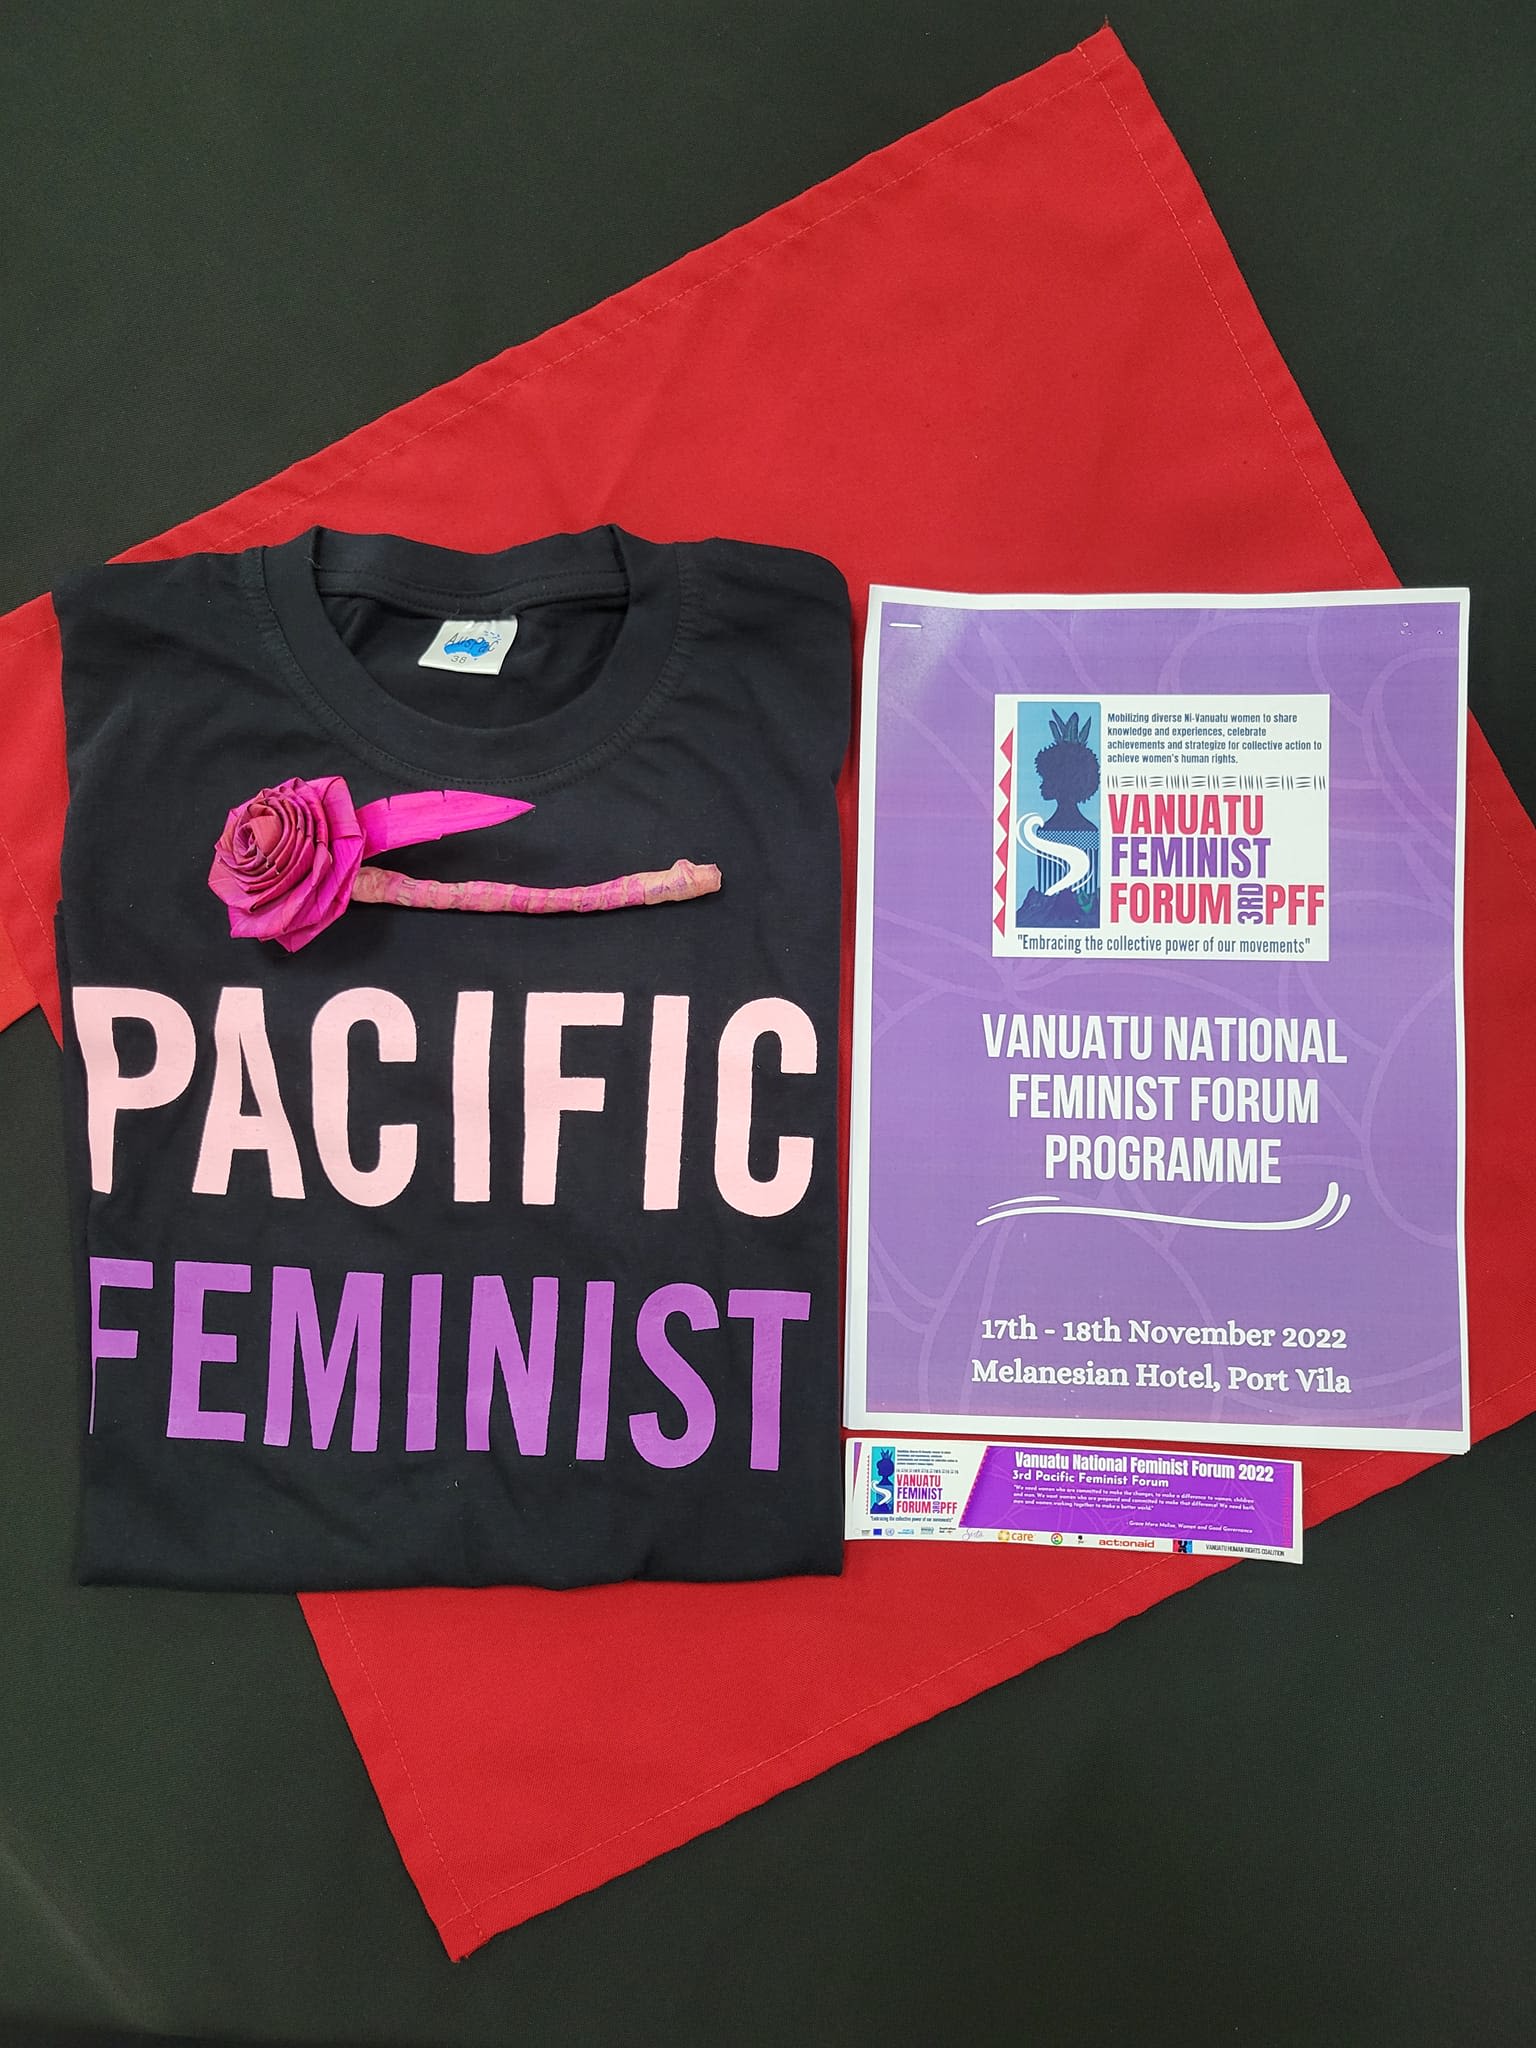 A shot of a table at the Vanuatu National Feminist Forum where a t-shirt with the words 'Pacific Feminist' and the forum programme are displayed.